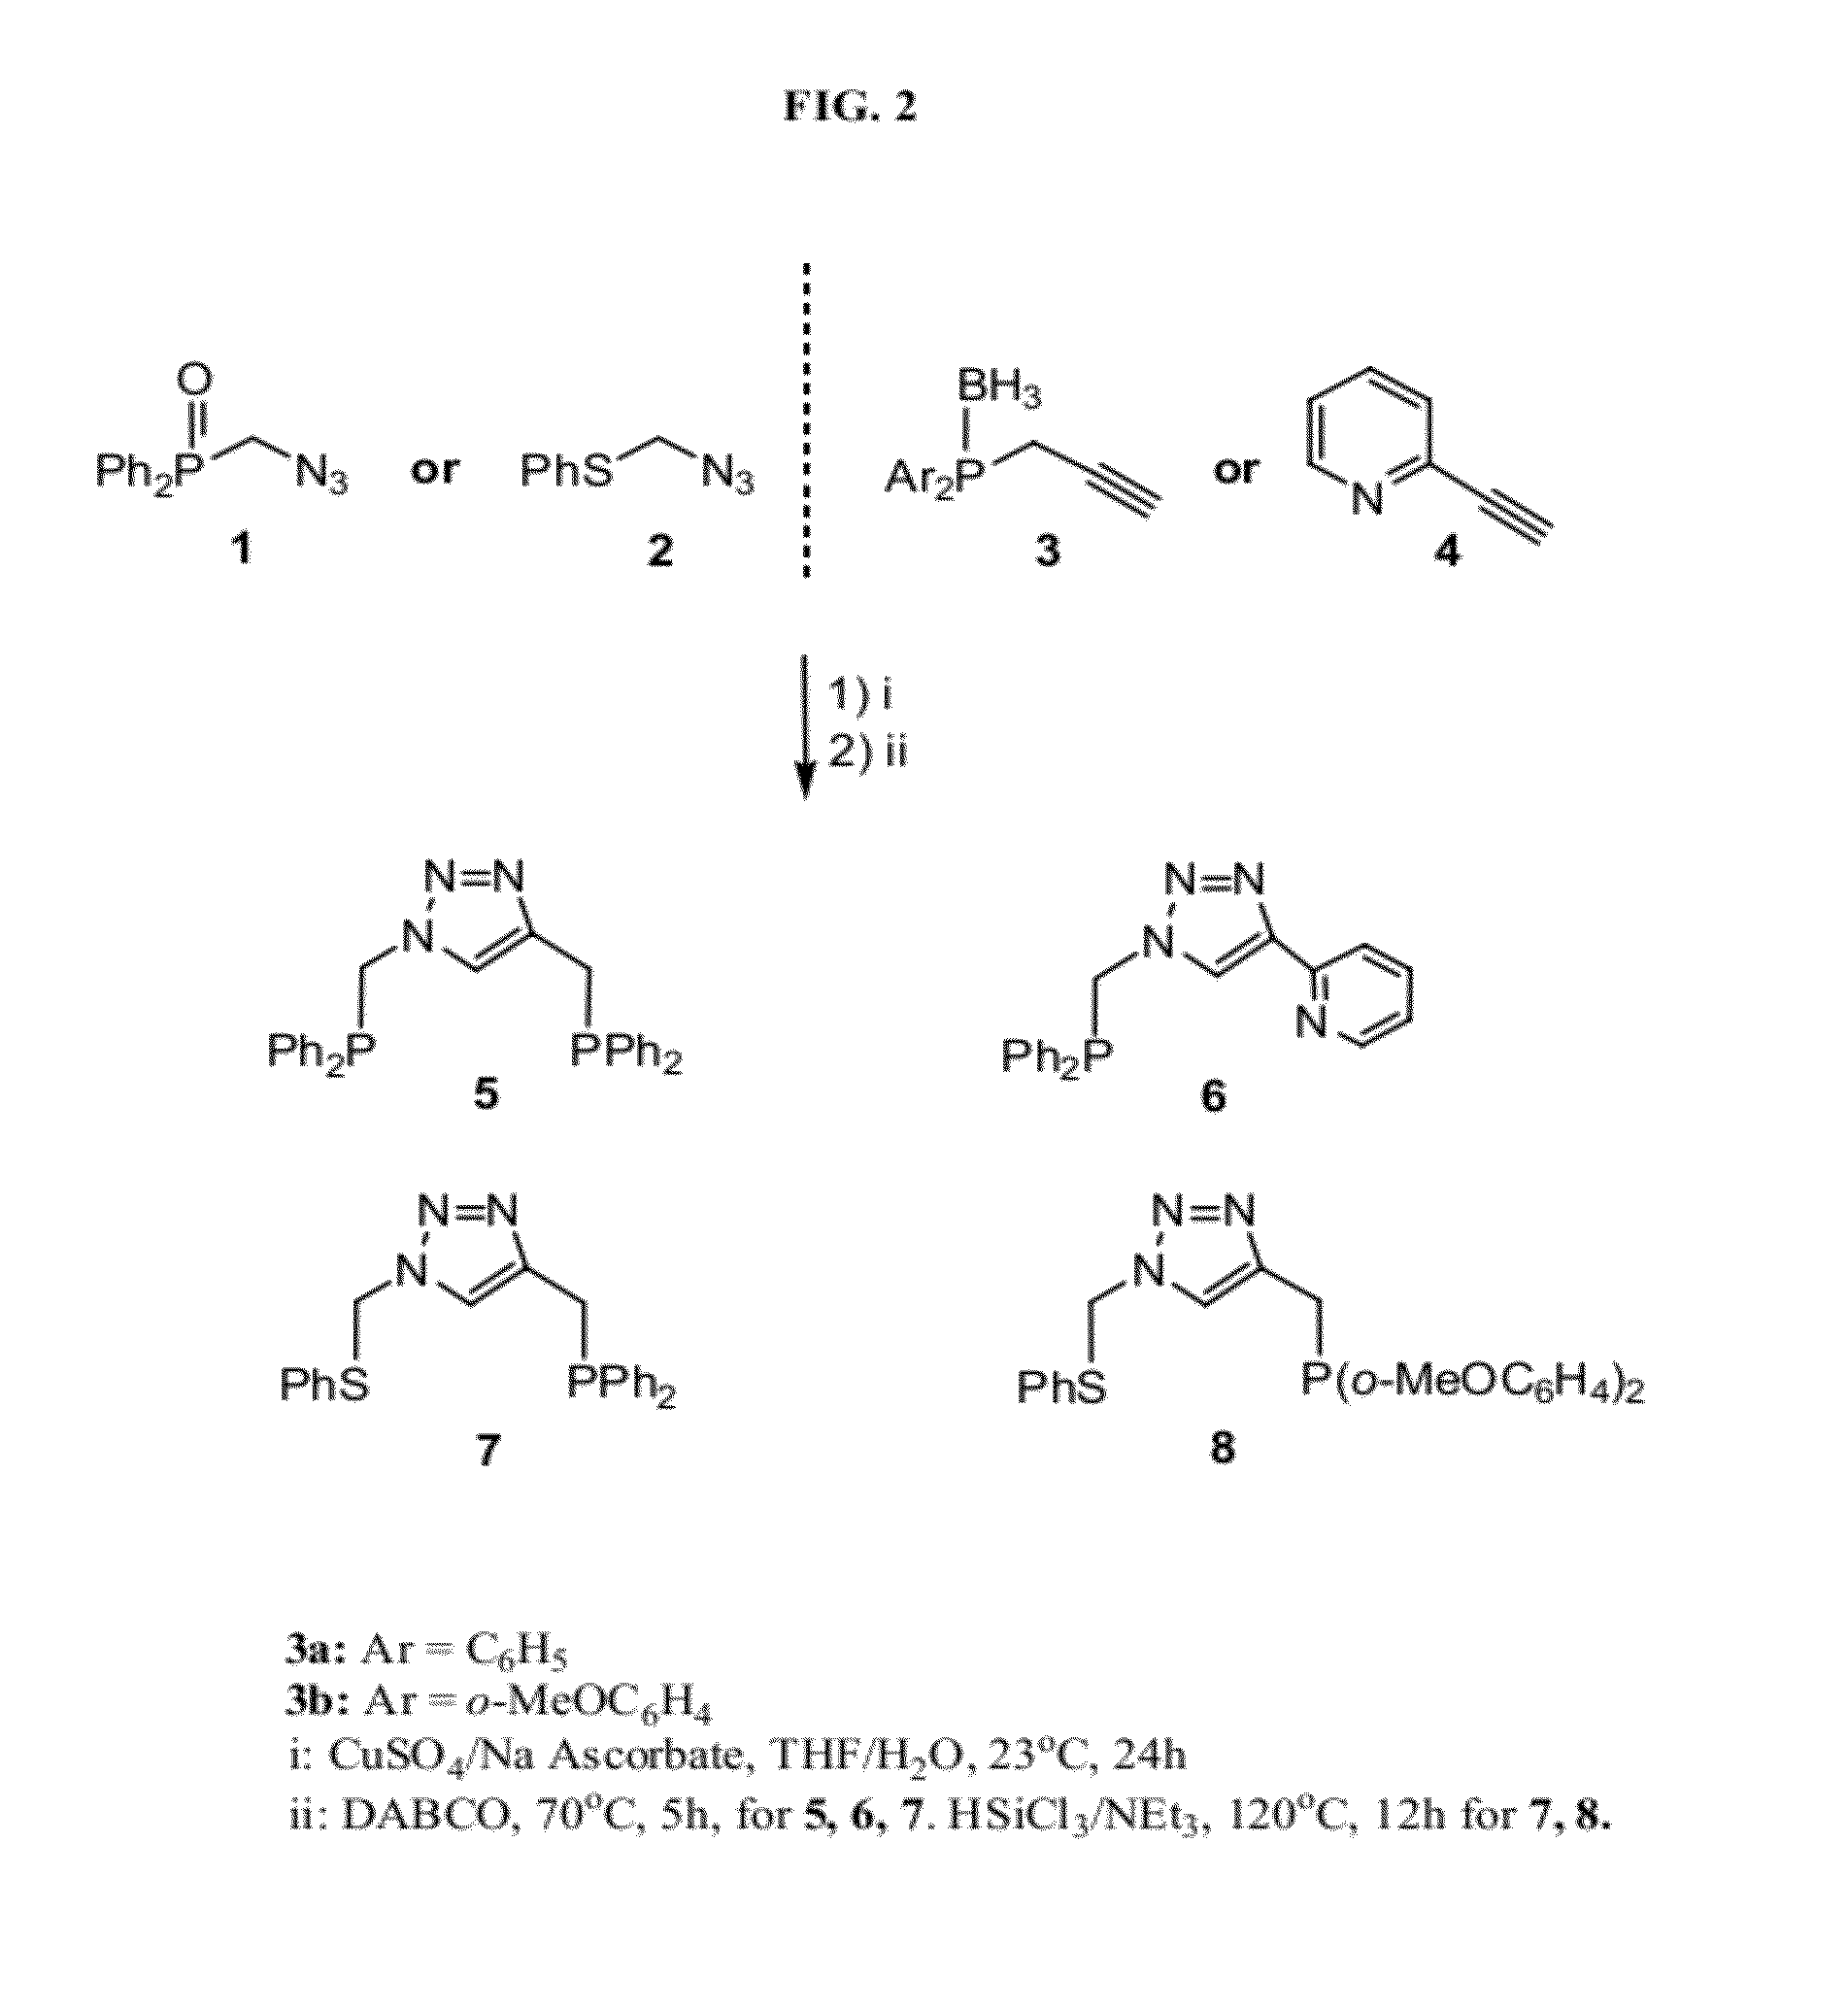 Diarylphosphine- and dialkylphosphine-containing compounds, processes of preparing same and uses thereof as tridentate ligands